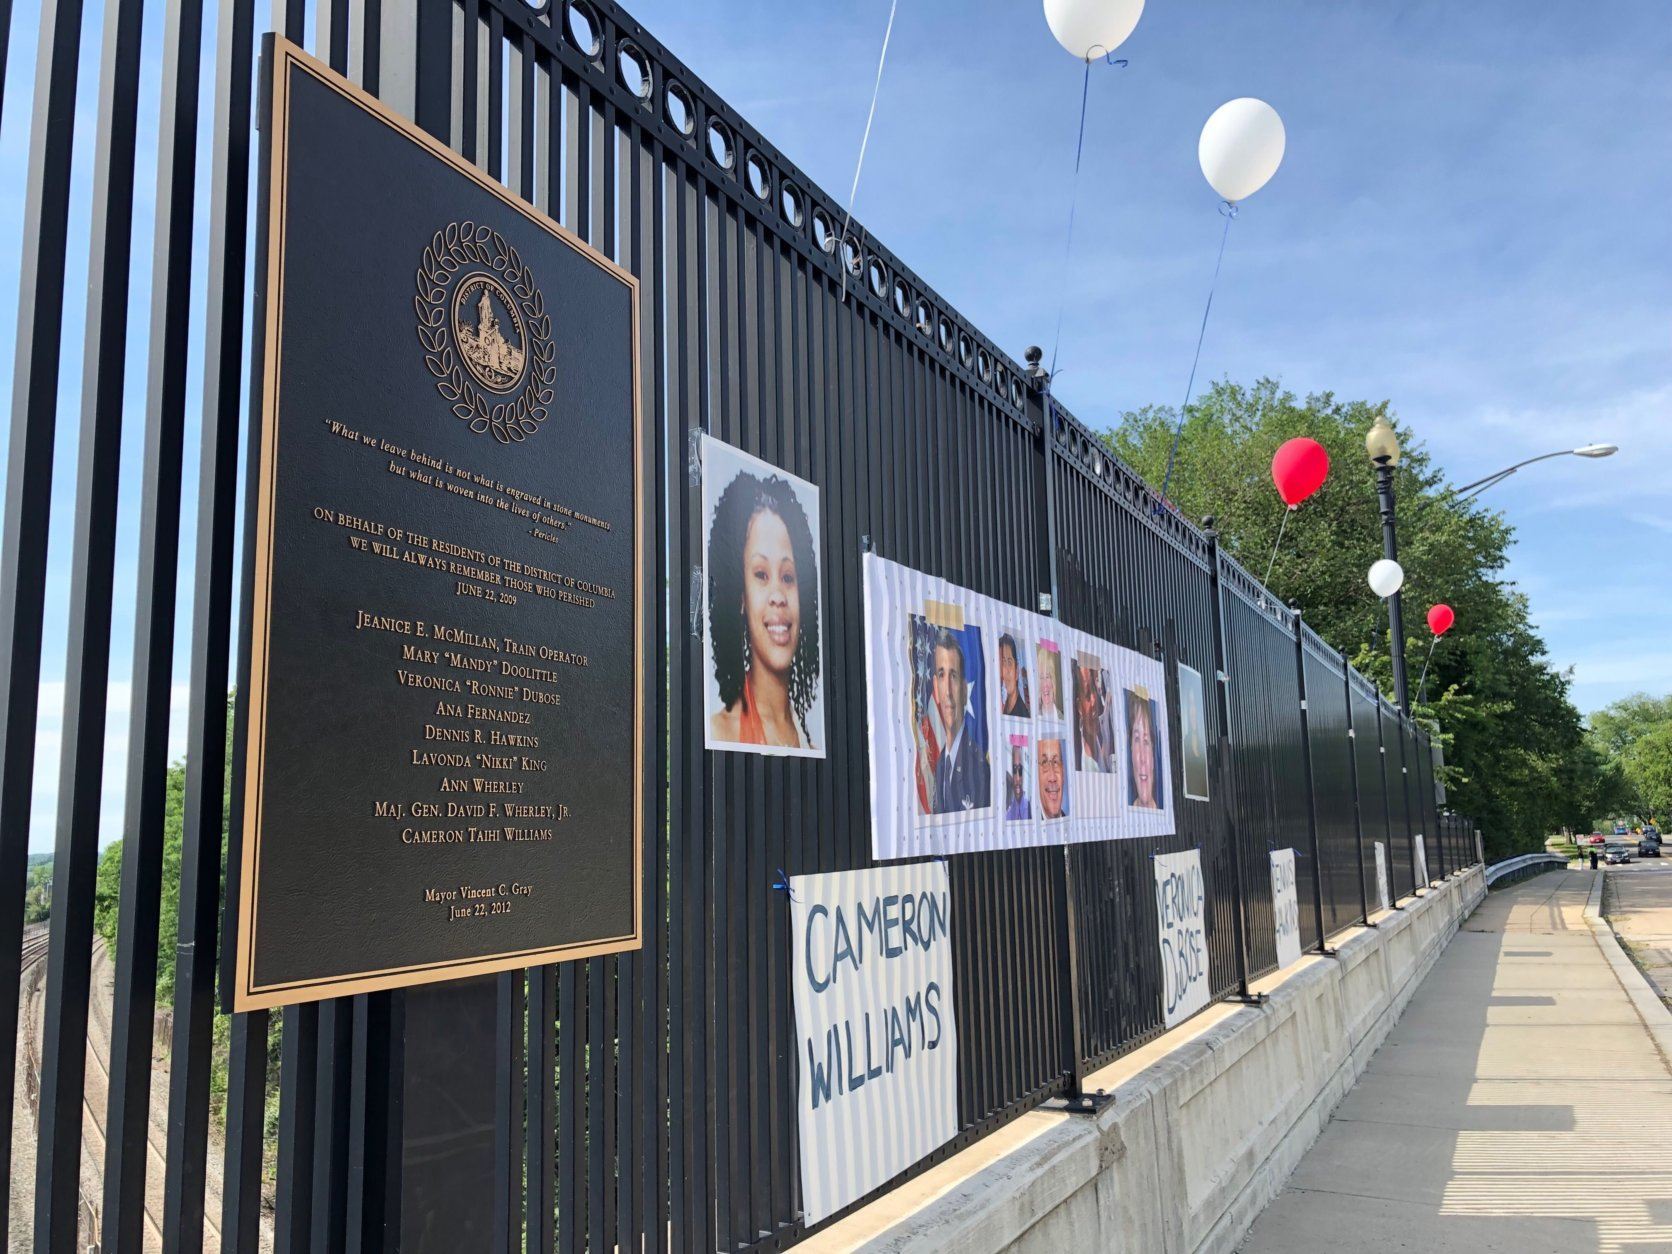 On the New Hampshire Avenue bridge over the tracks where the 2009 Metro crash happened, the names of those killed were posted along with photos. Red and white balloons were tied to the fence. (WTOP/Kate Ryan) 